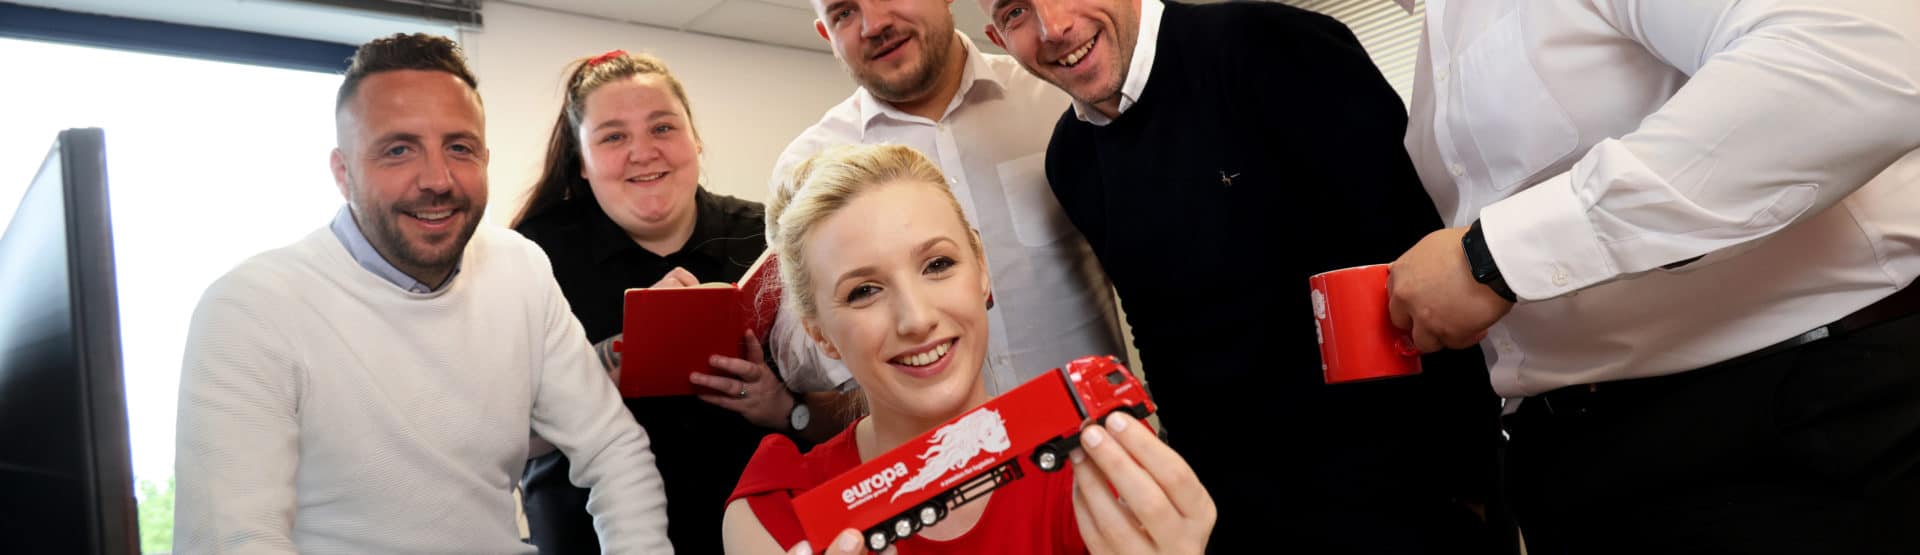 The Europa Road Cardiff team are all facing the camera. Branch manager Chelsea is holding a red, branded Europa truck.